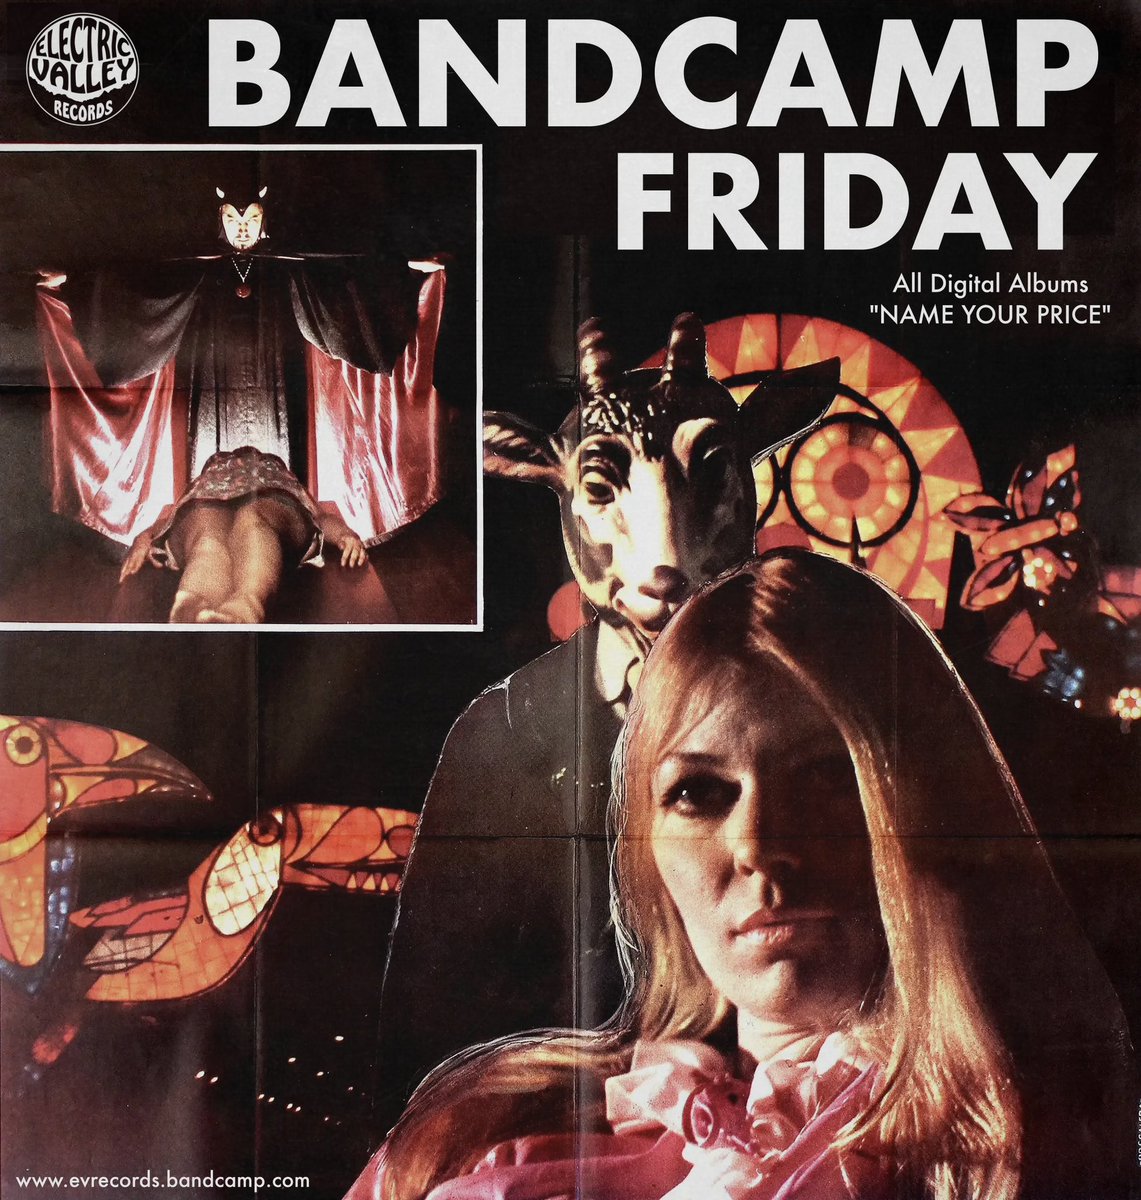 It’s Bandcamp Friday🤘 All digital albums at “Name Your Price” evrecords.bandcamp.com Thanks so much for the support🙏 • Don’t forget that you can now subscribe and take advantage of all the exclusive benefits, take a look at evrecords.bandcamp.com • #electricvalleyrecords